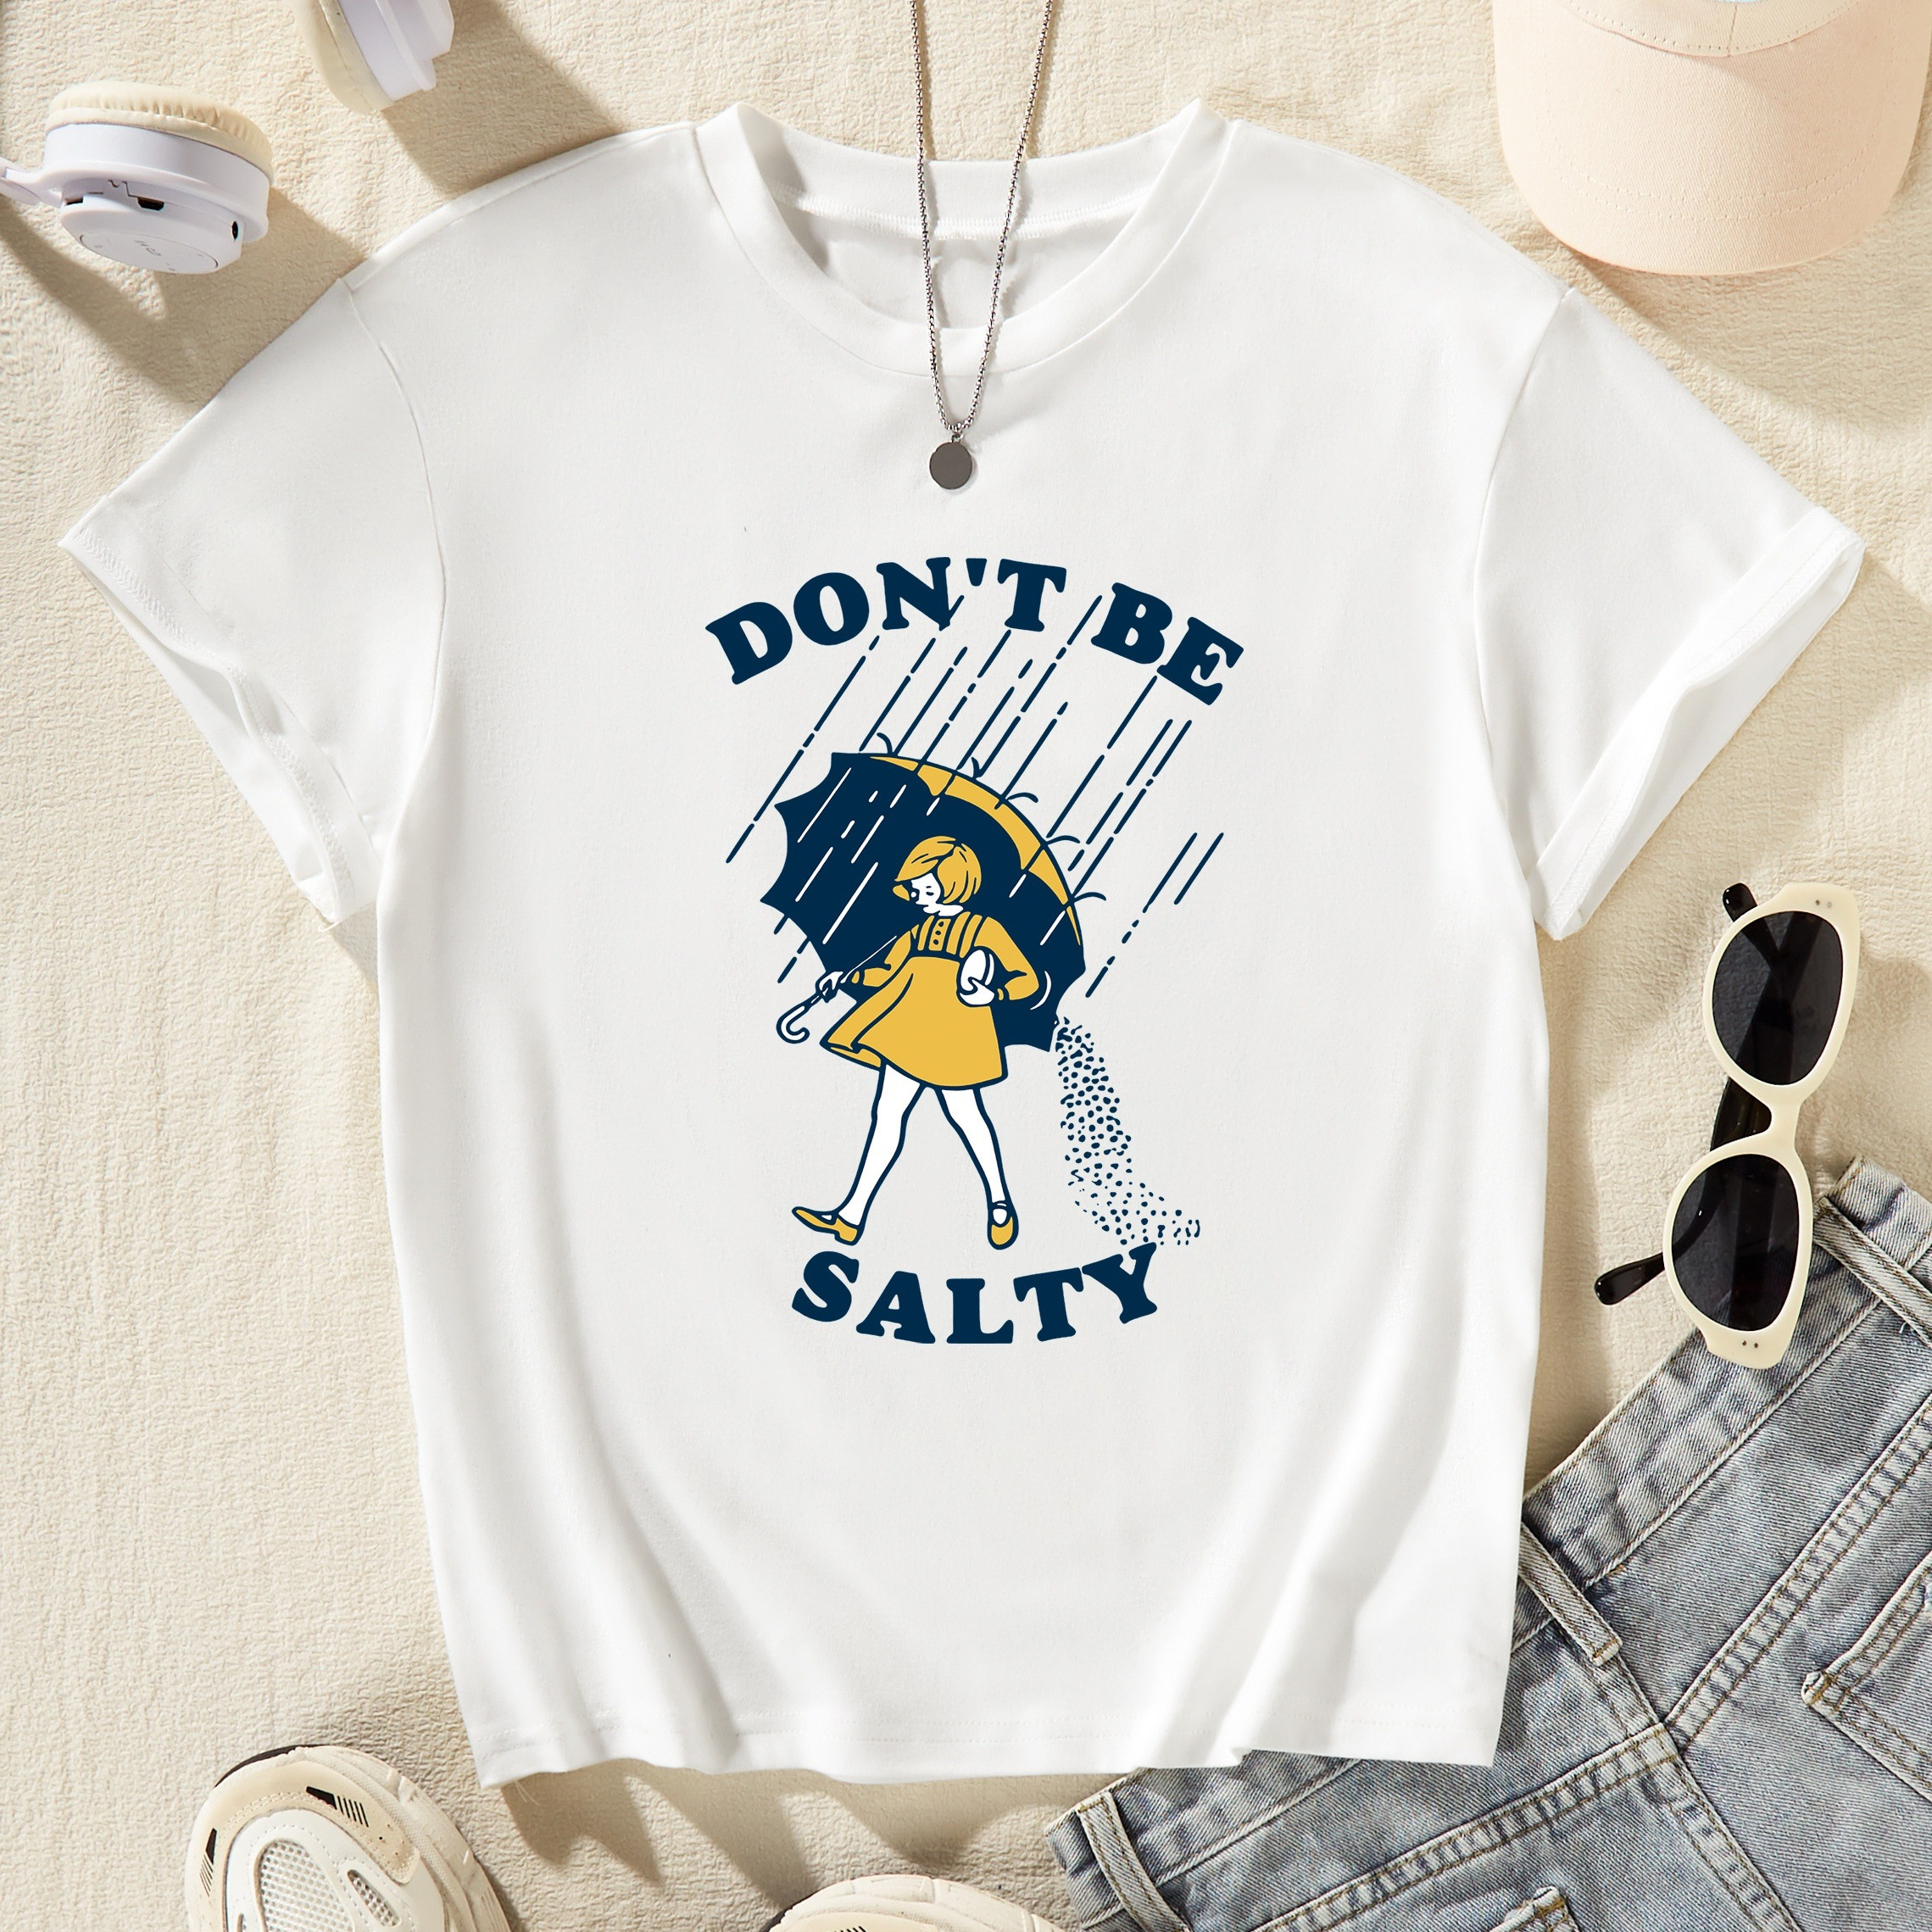 

Don't Be Salty And Cute Cartoon Girl With Umbrella Graphic Print, Girls' Casual Crew Neck Short Sleeve T-shirt, Comfy Top Clothes For Spring And Summer For Outdoor Activities